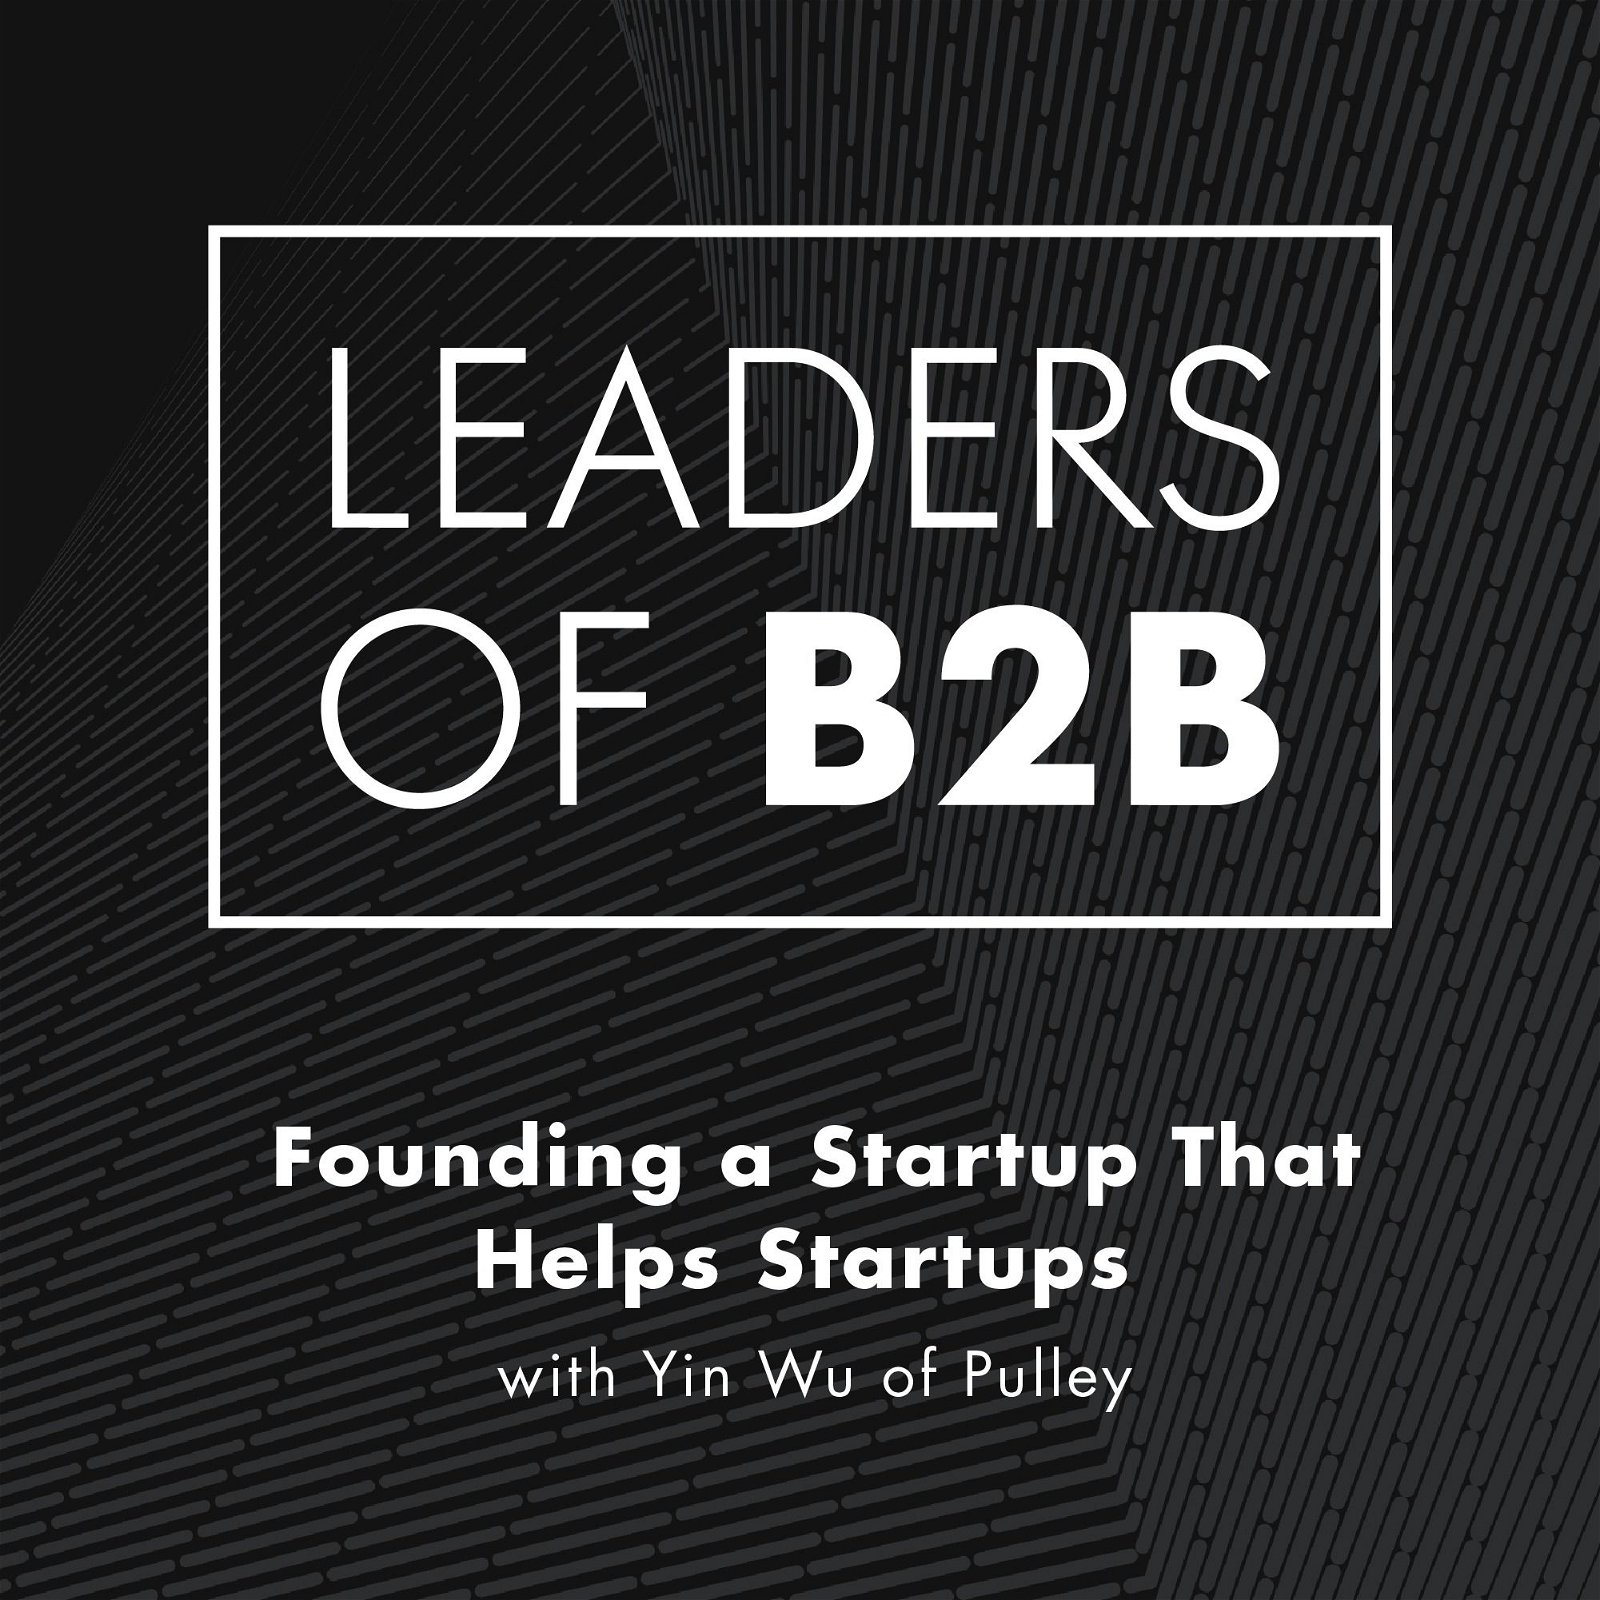 Founding a Startup That Helps Startups with Yin Wu of Pulley